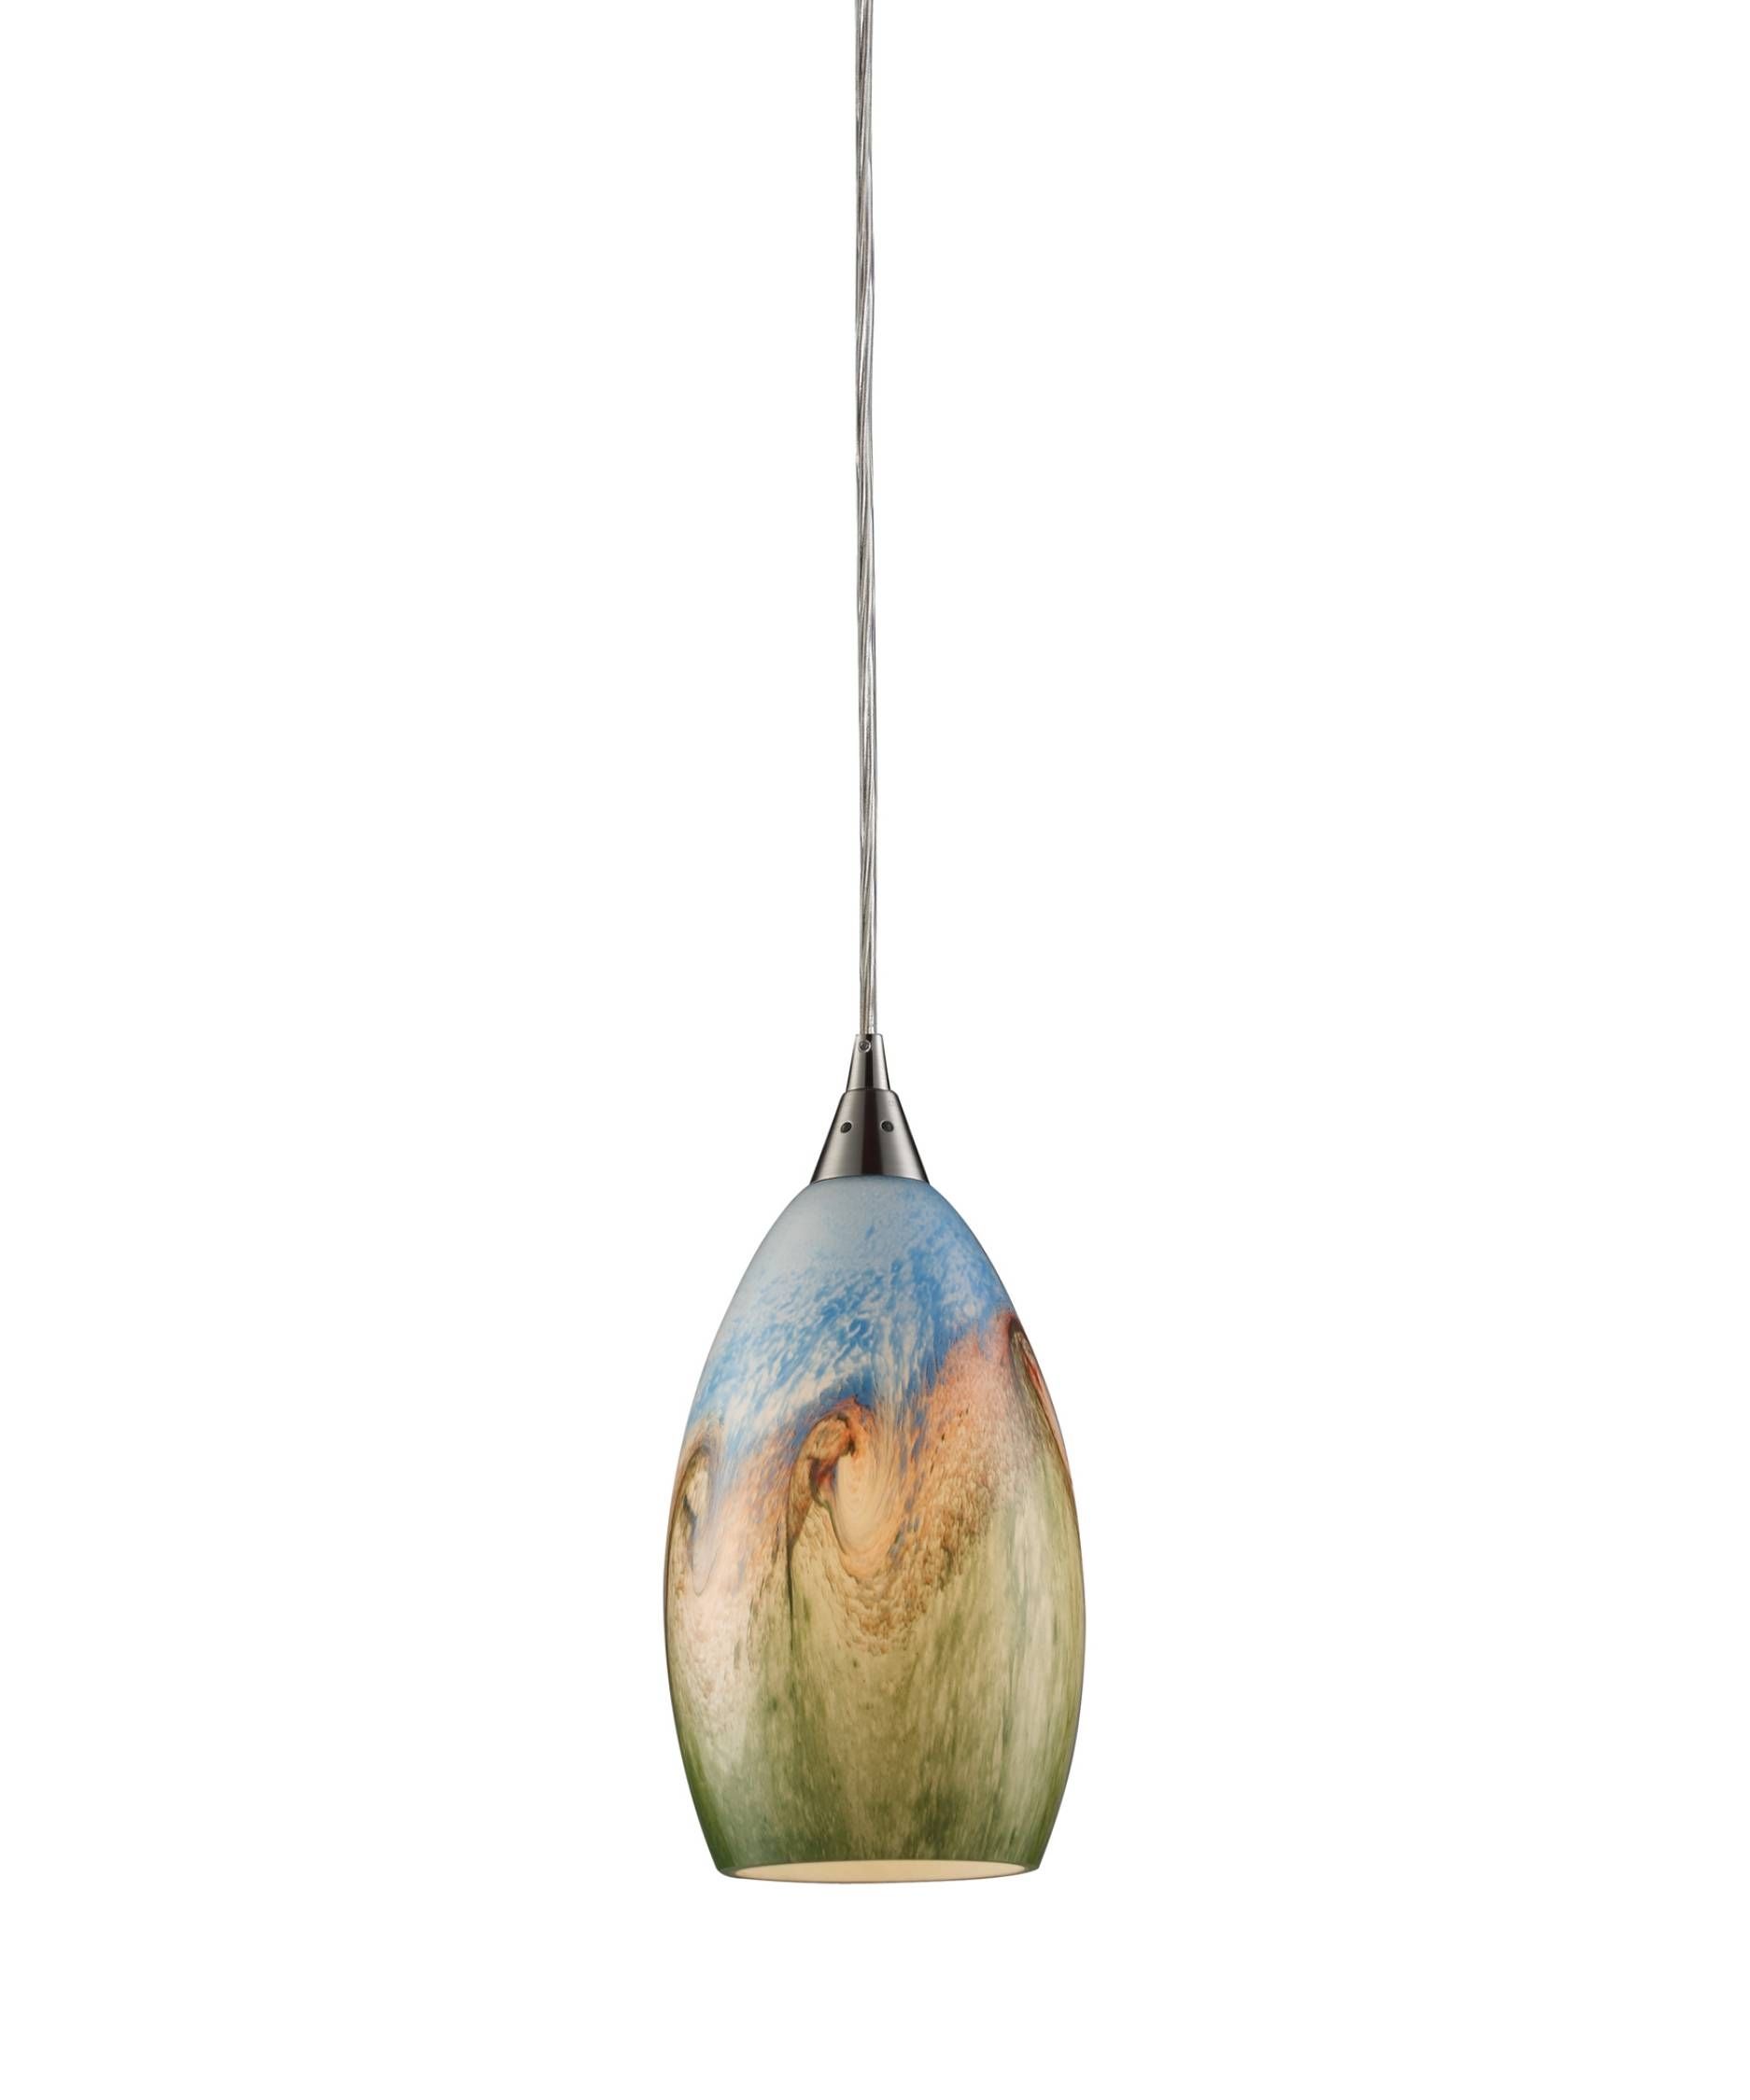 Great Murano Glass Pendant Lights 16 In Remote Control Ceiling Within Murano Glass Lighting Pendants (View 8 of 15)